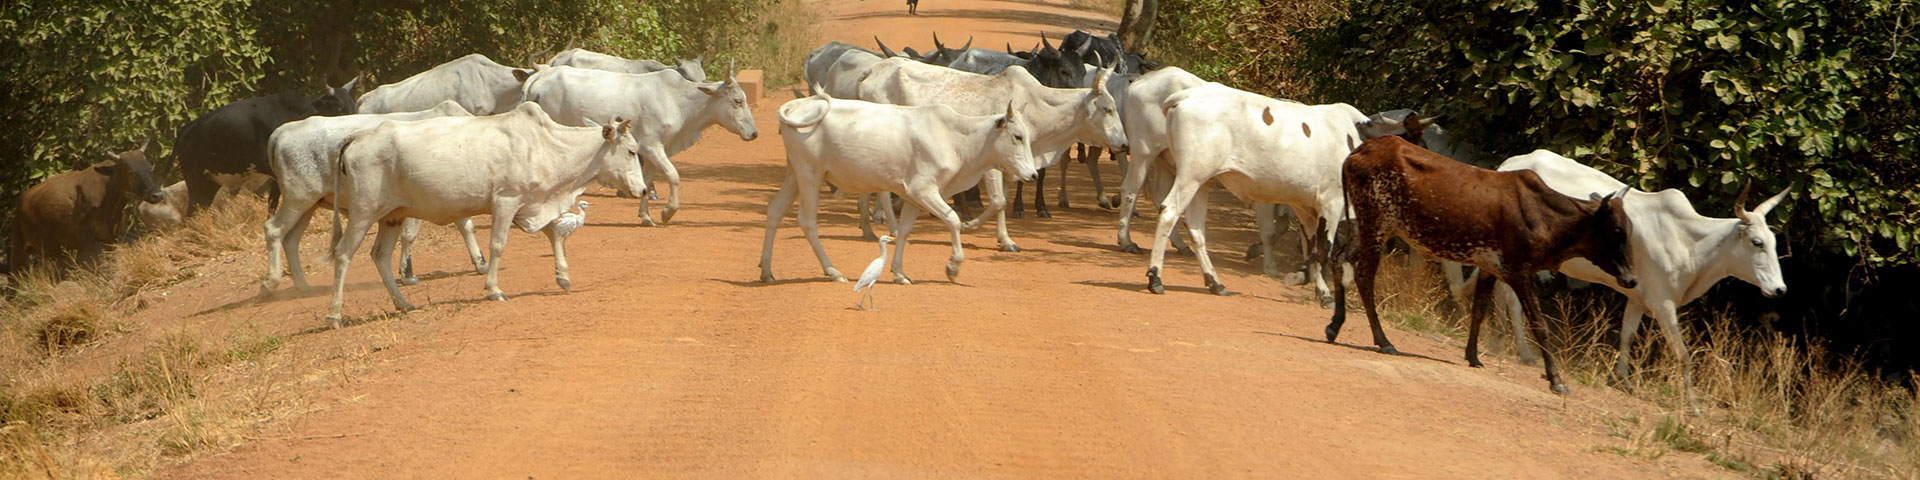 A herd of cows crosses a dirt country road.